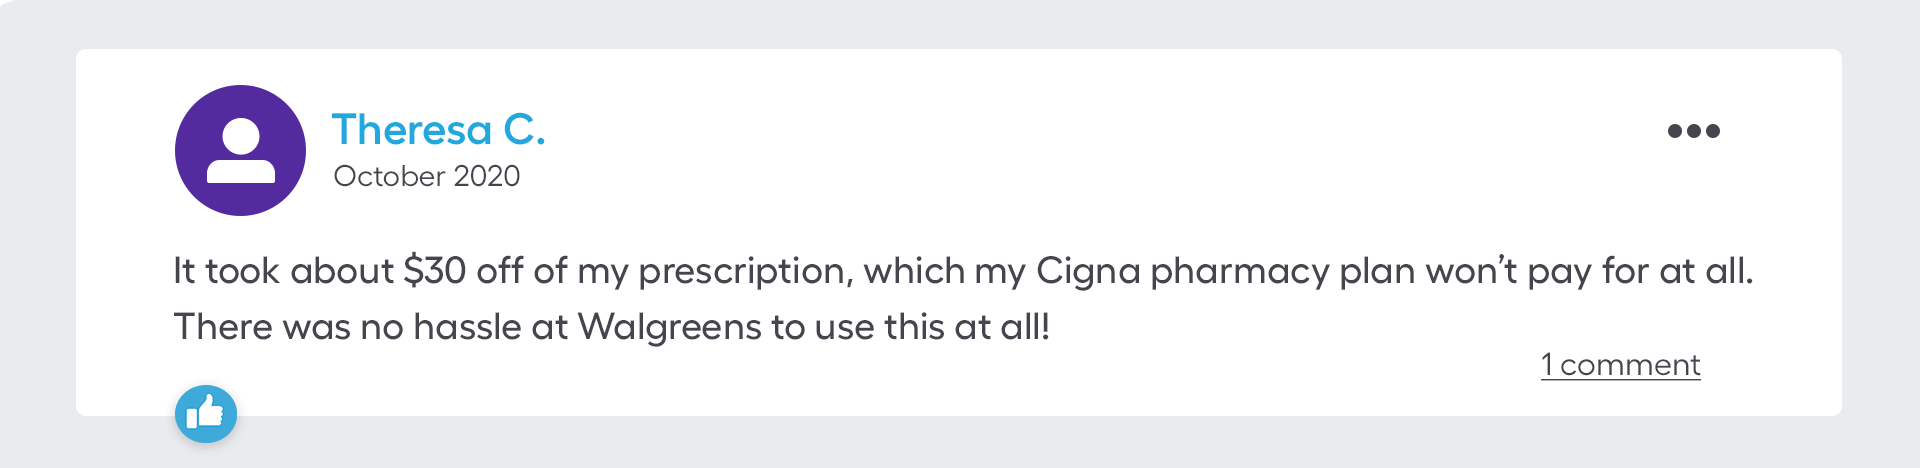 It took about $30 off of my prescription, which my Cigna pharmacy plan won’t pay for at all. There was no hassle at Walgreens to use this at all!